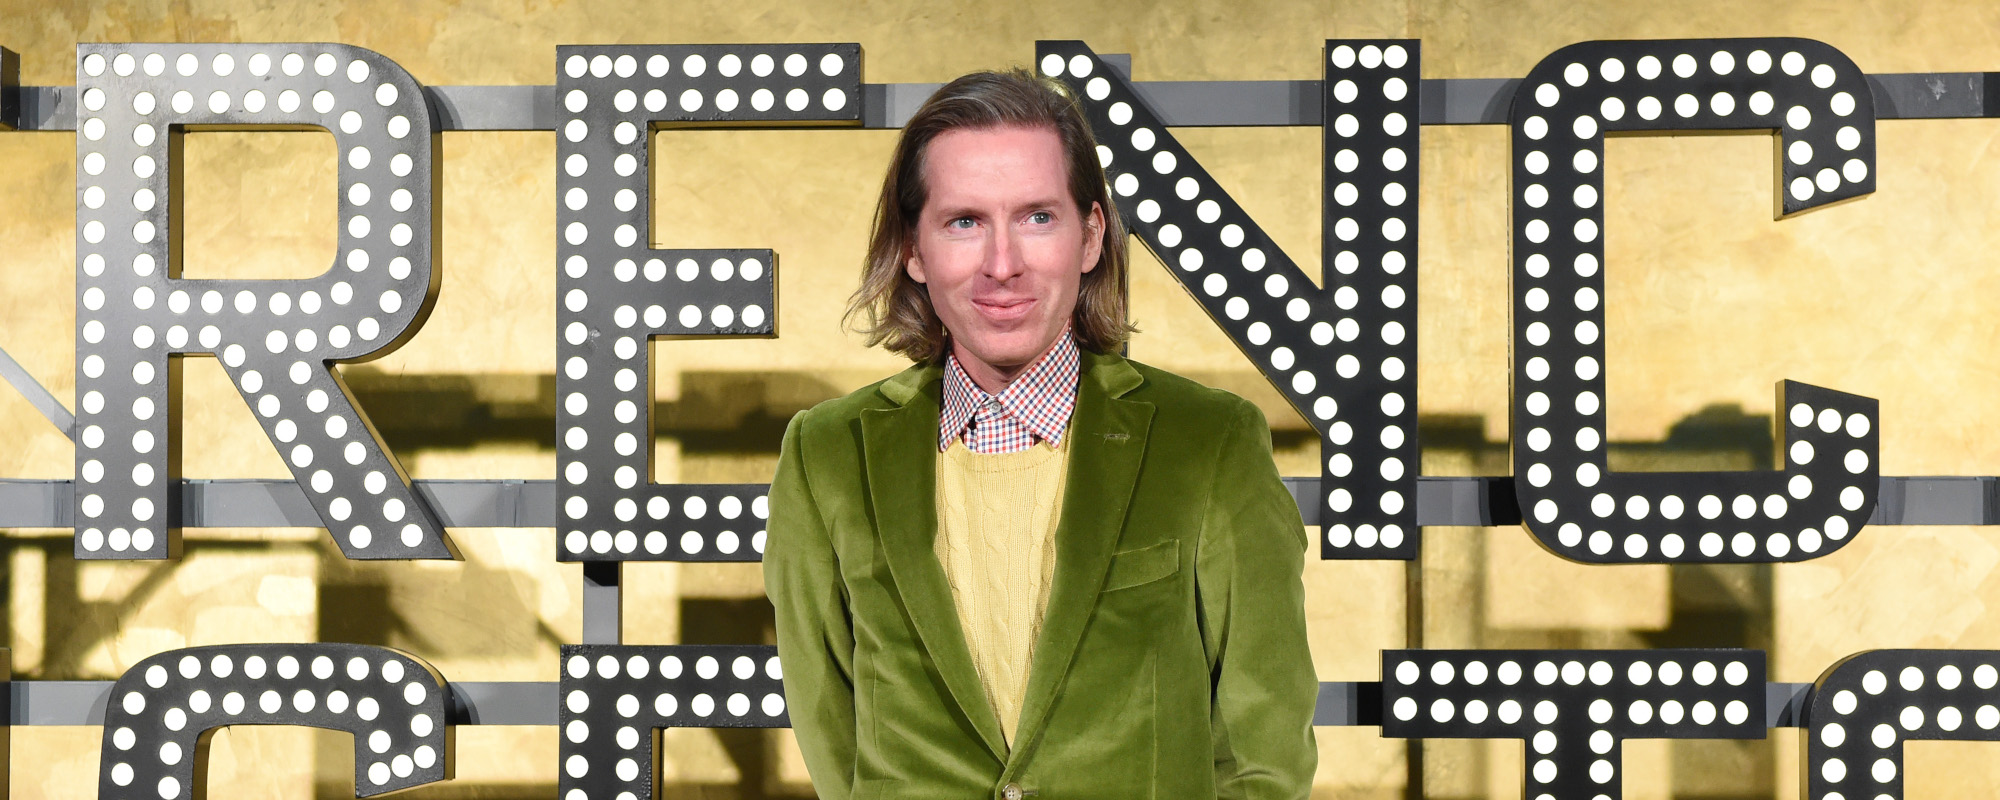 Wes Anderson Movies Ranked: Worst to Best